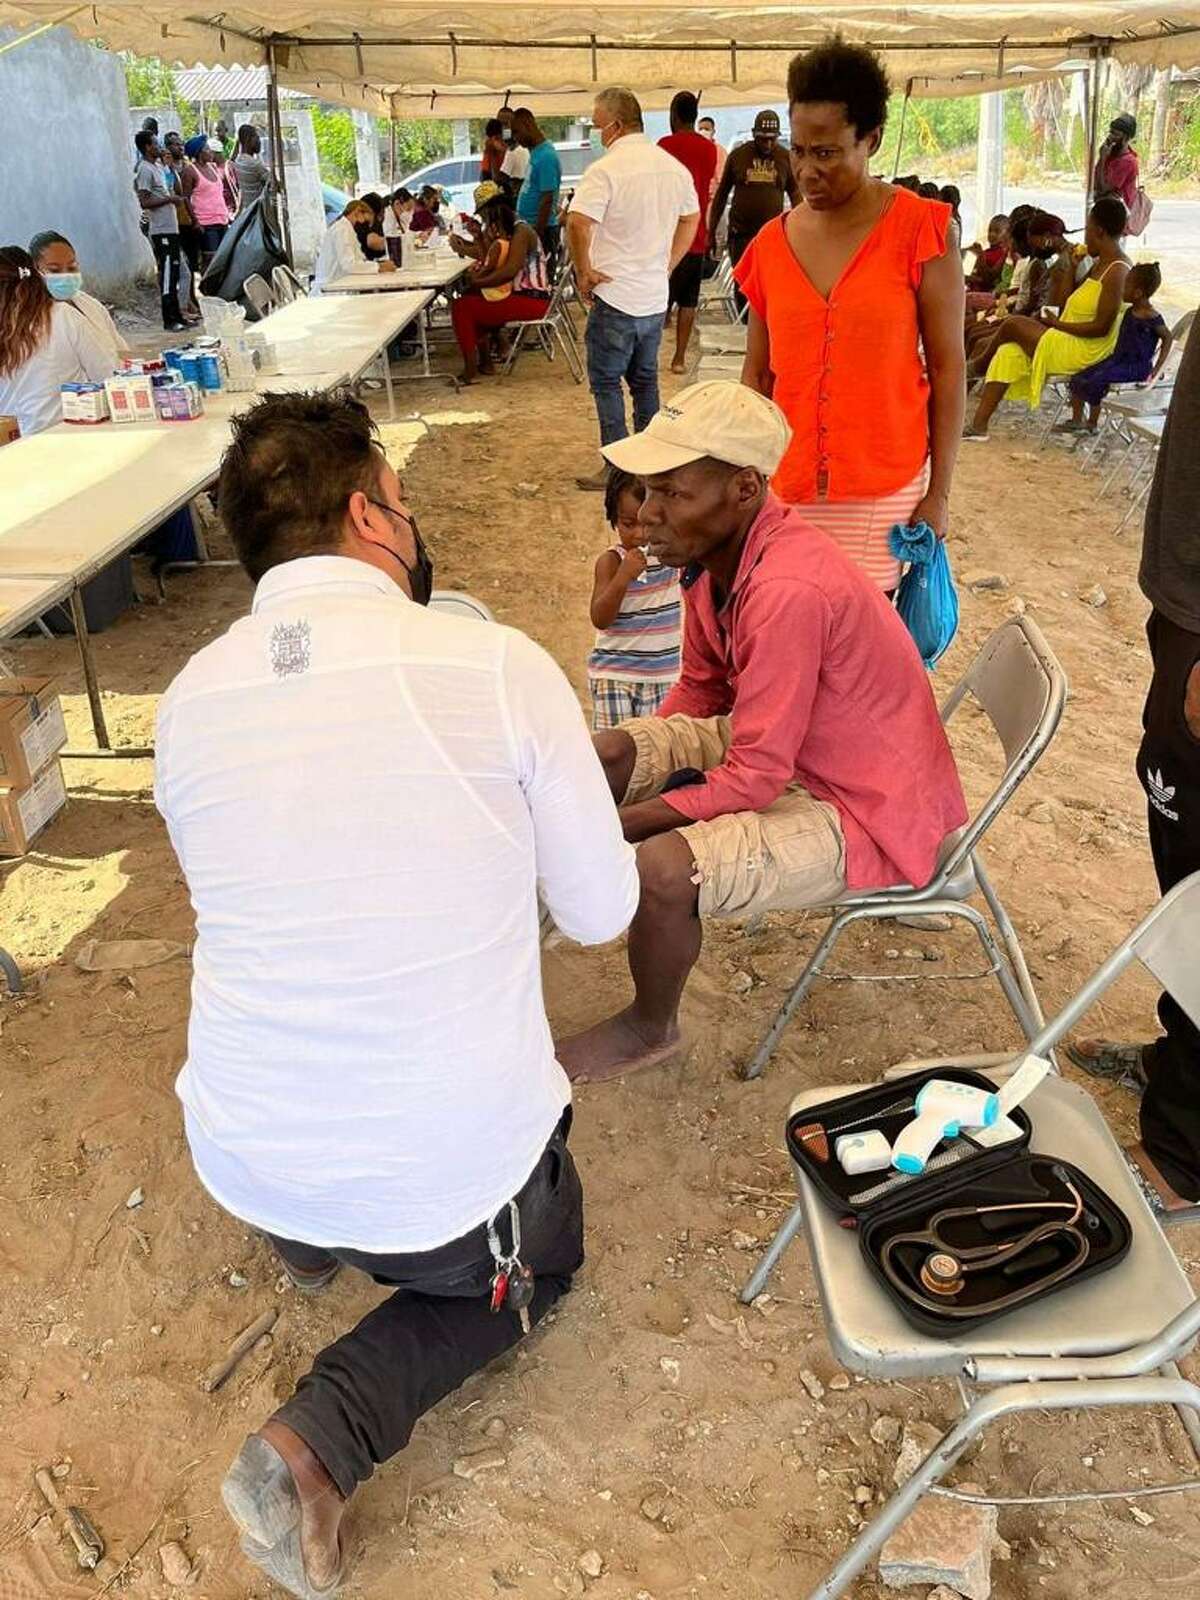 Nuevo Laredo health officials are dealing with an influx of about 5,500 Haitian immigrants that have arrived to the city as they await immigration court proceedings in the United States. Many of the immigrants are unvaccinated, have poor health, COVID-19 and many women are pregnant and have not received adequate care. 